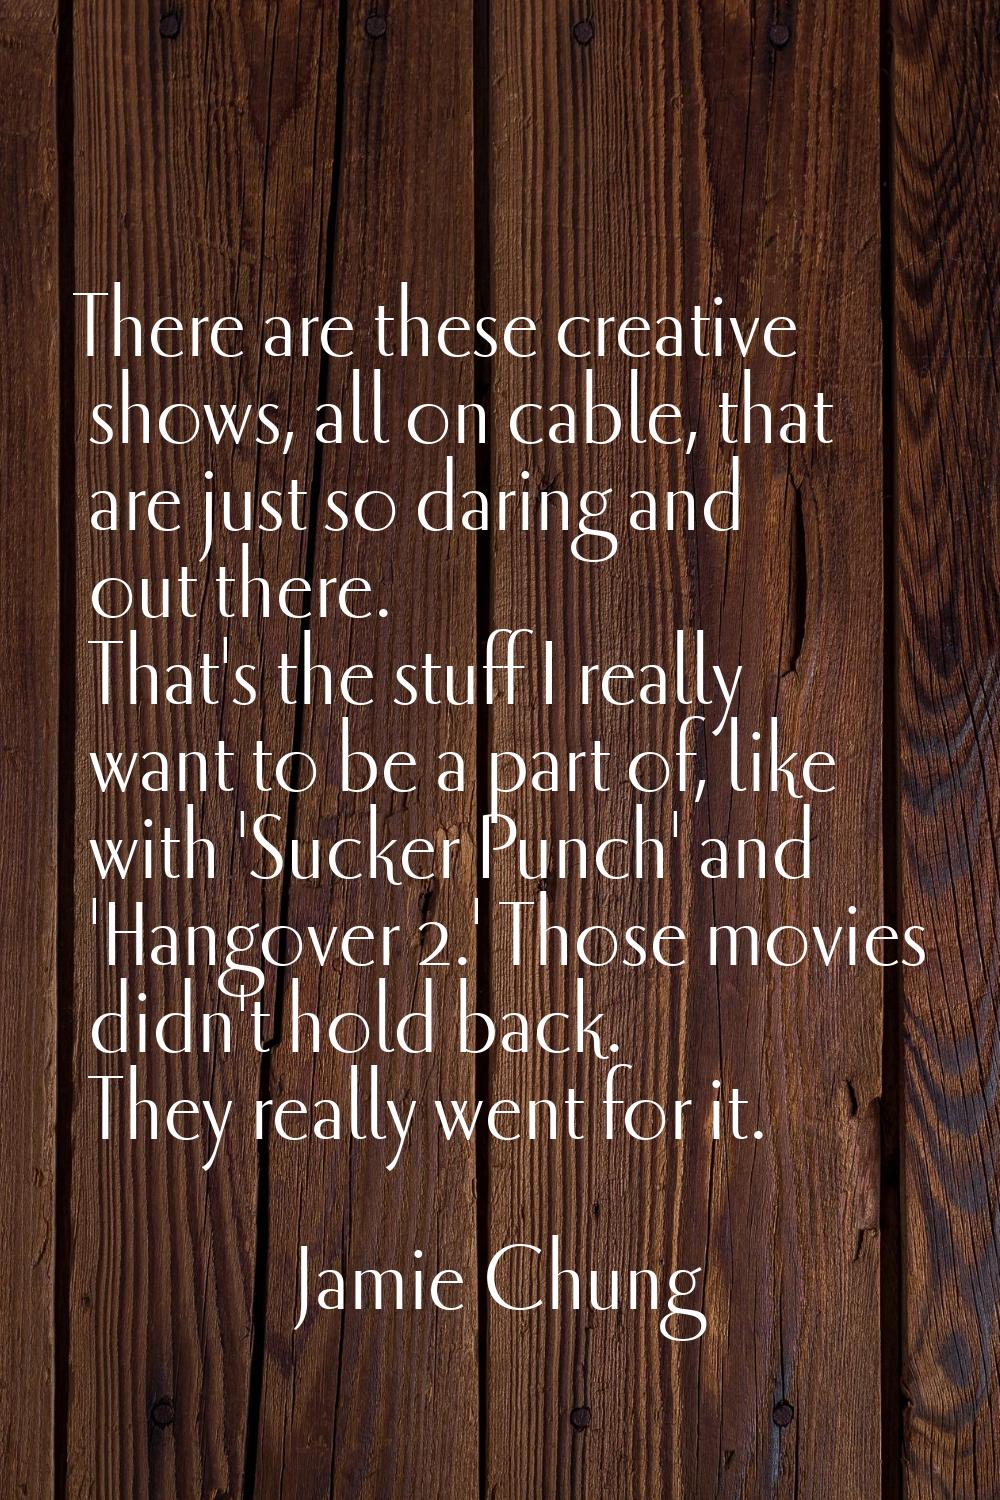 There are these creative shows, all on cable, that are just so daring and out there. That's the stu